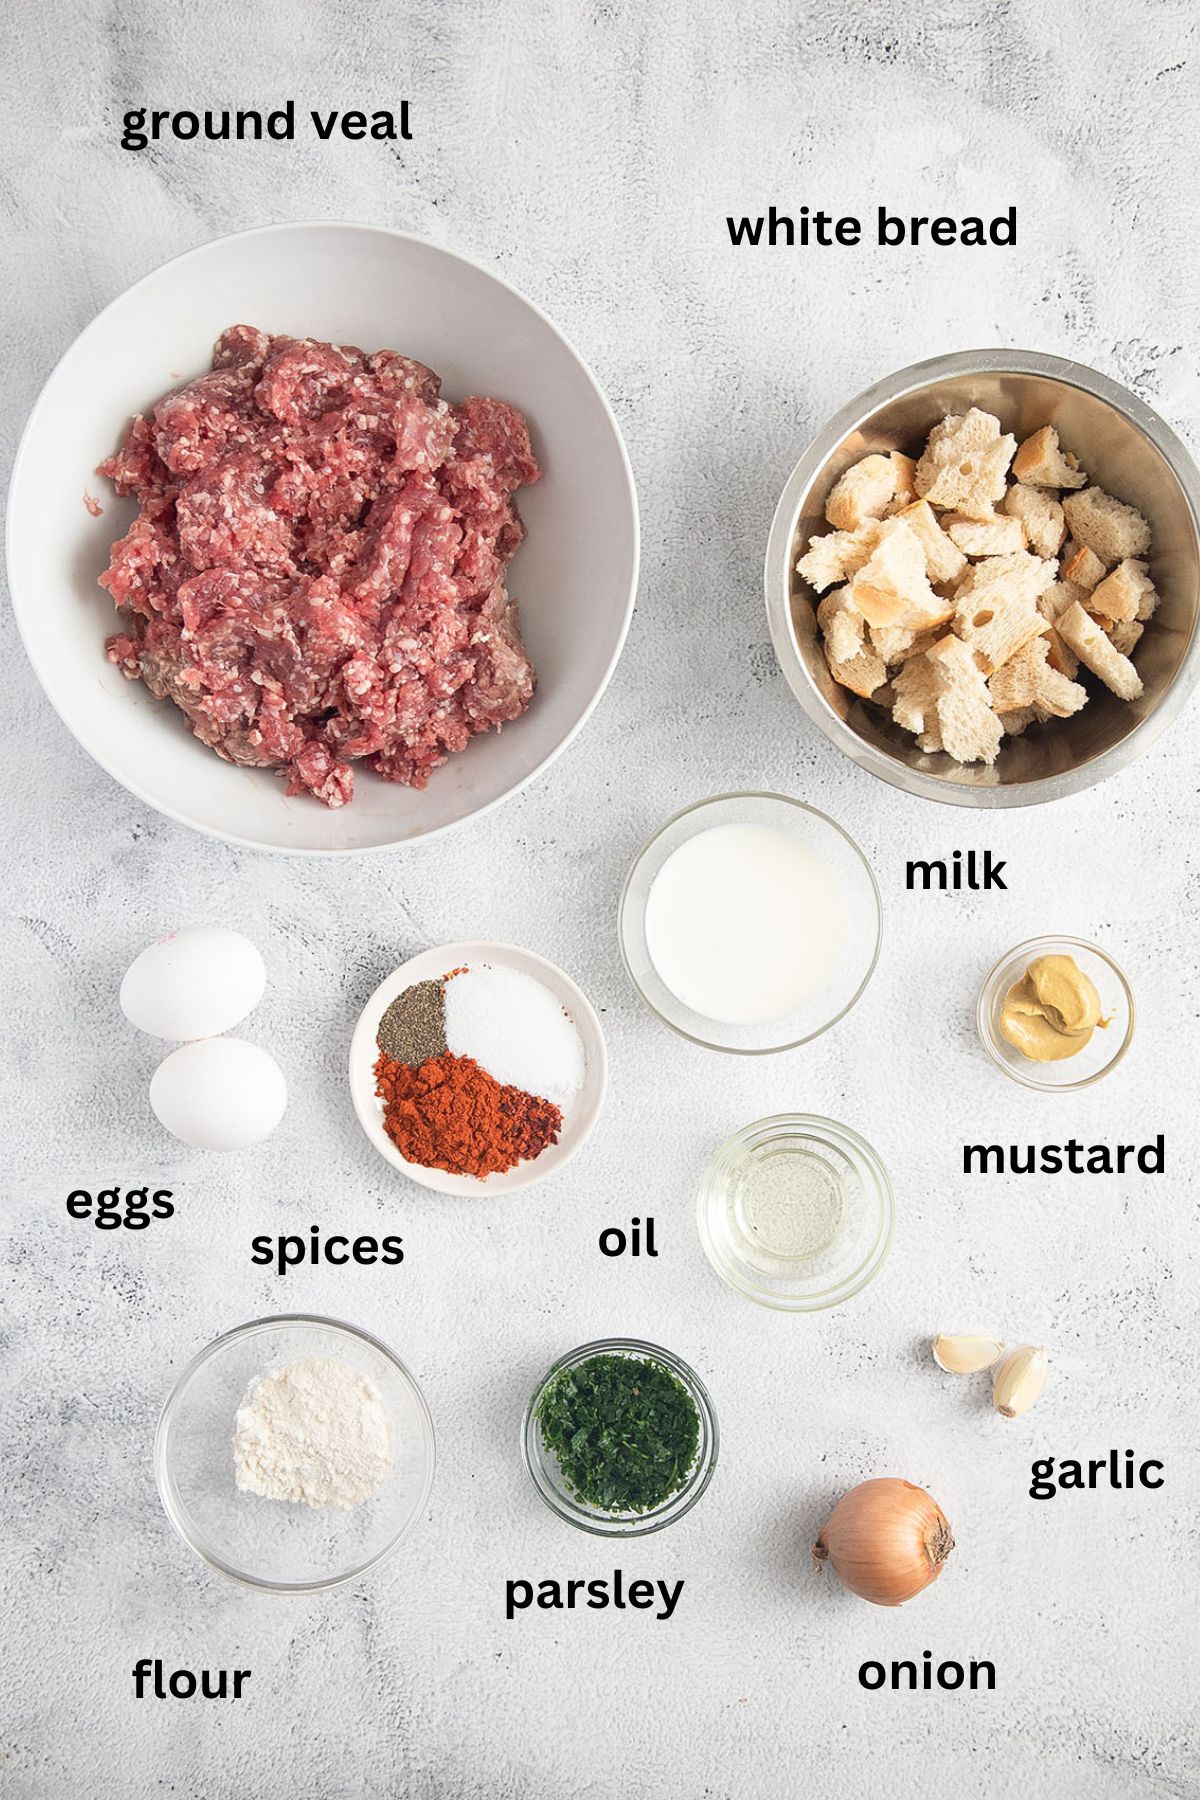 listed ingredients for making meatballs with ground veal, white bread, eggs and spices.